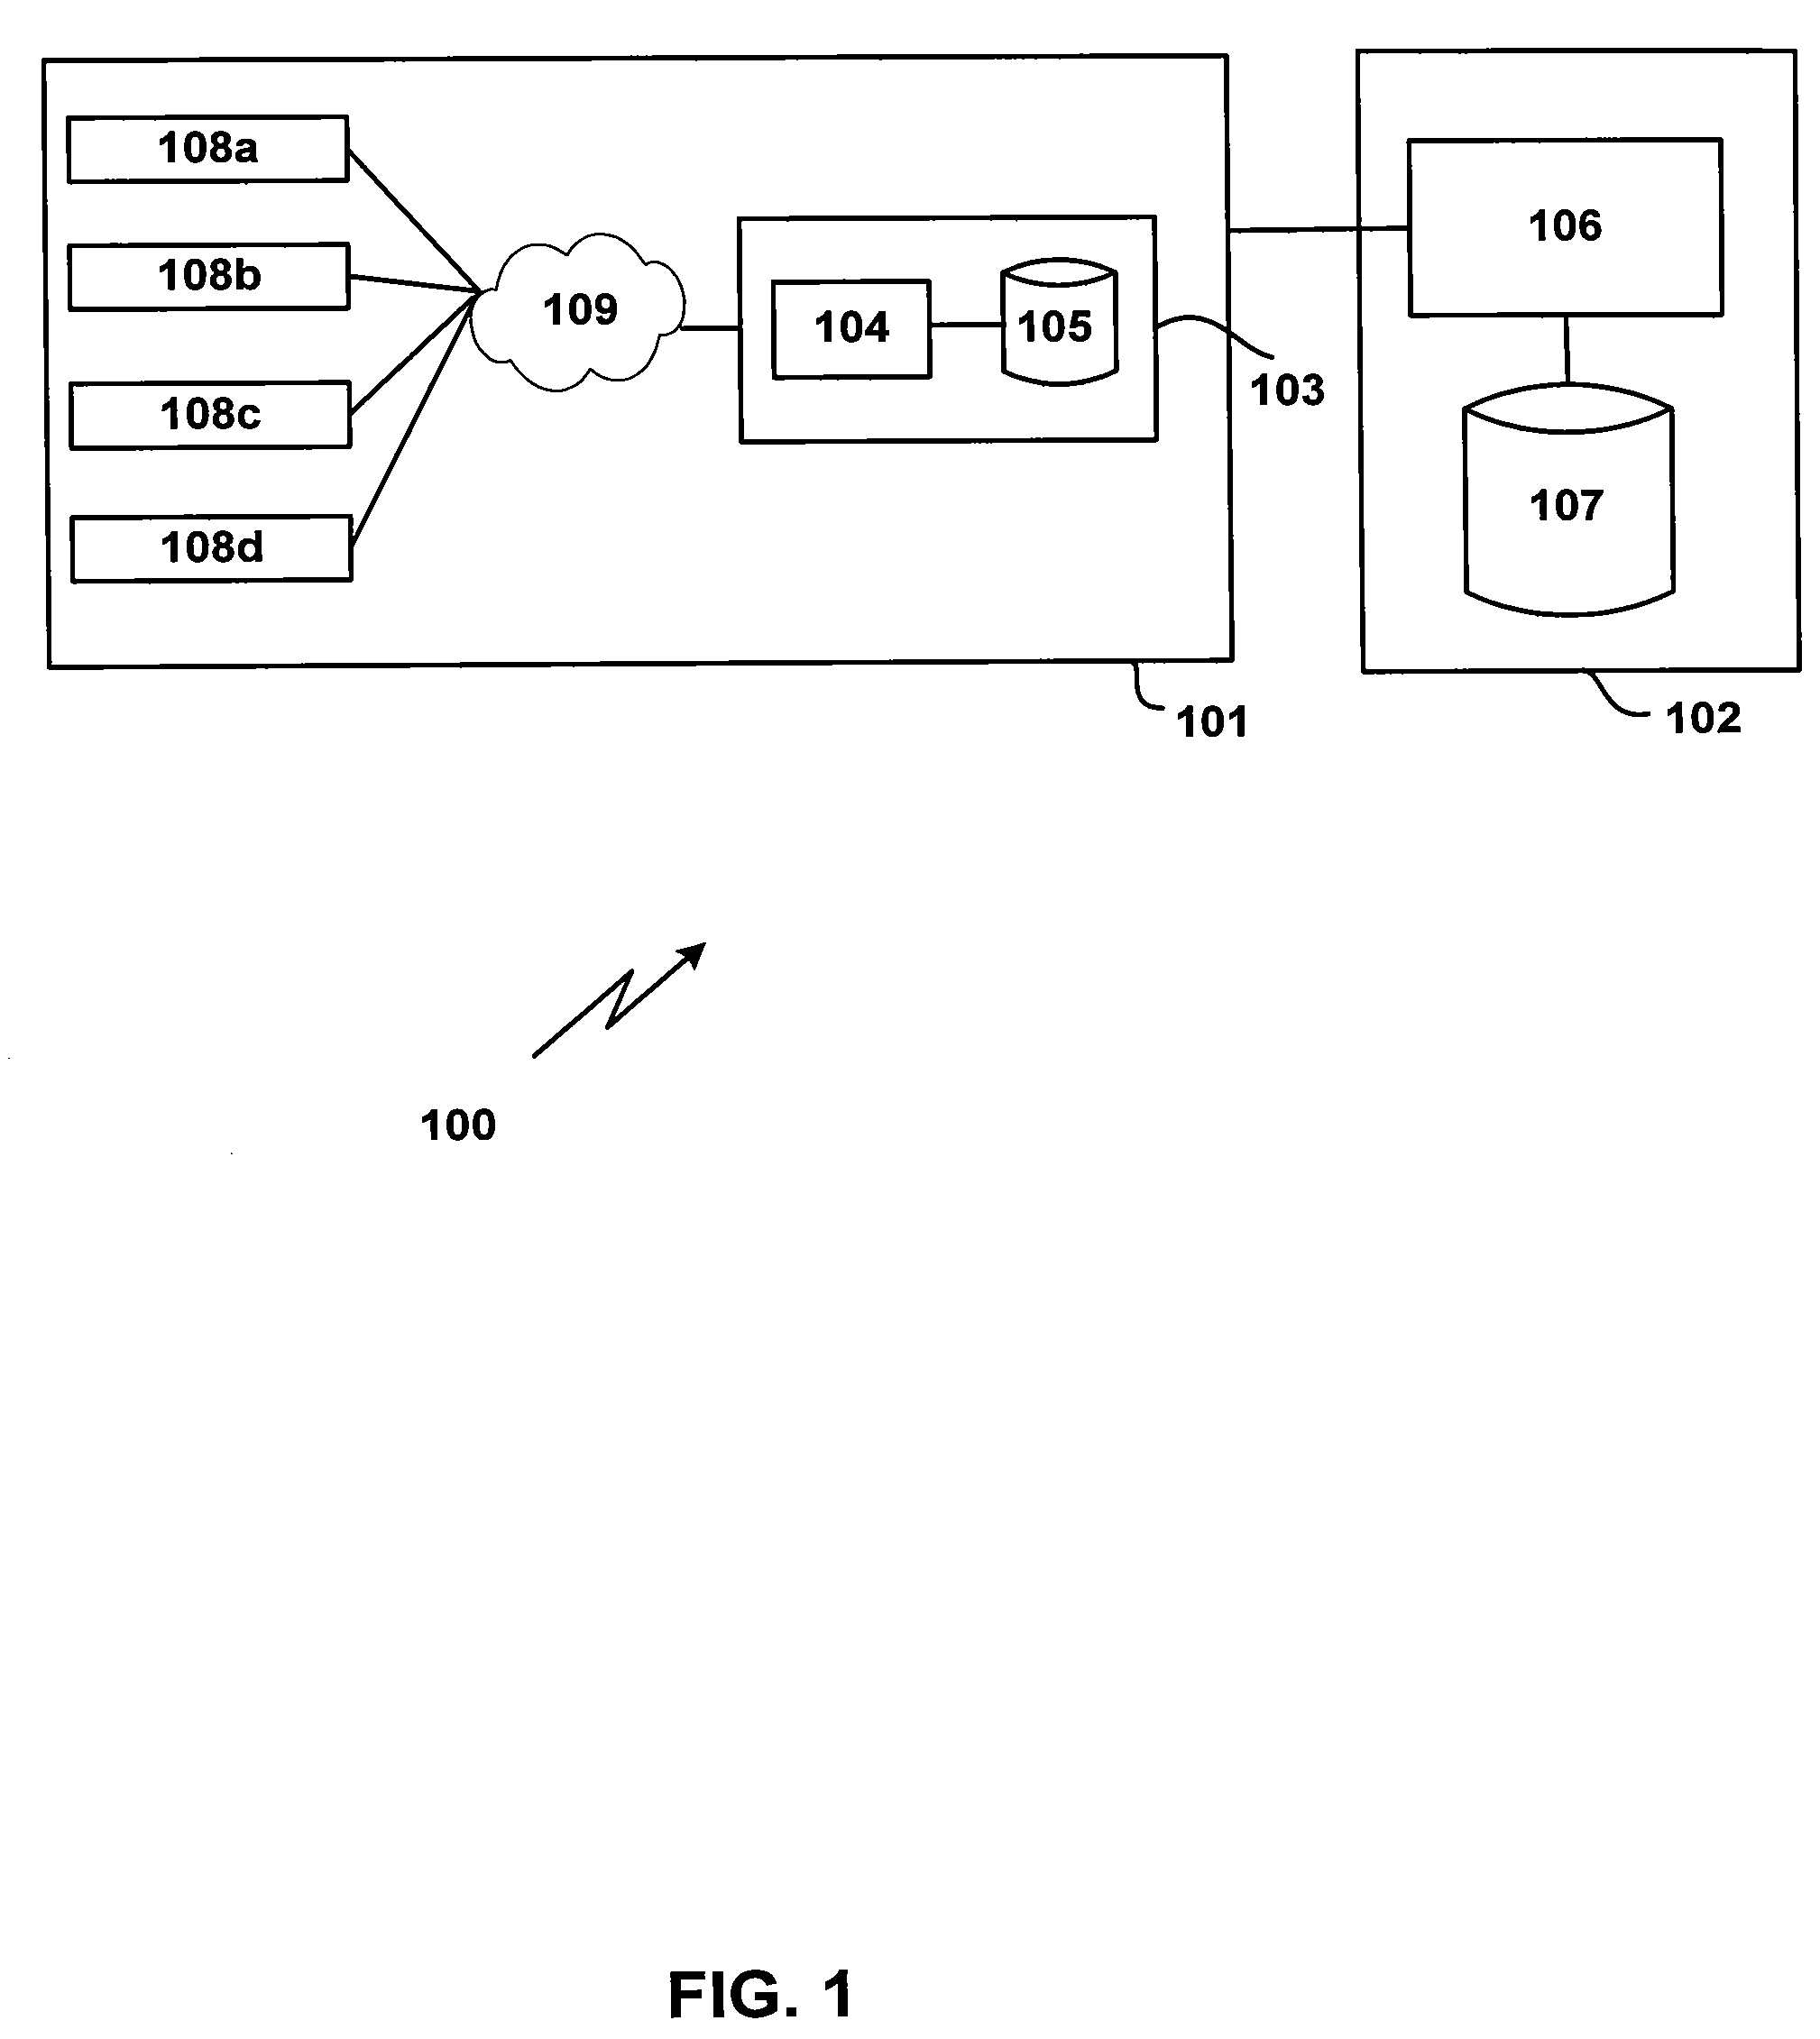 Systems and methods for evaluating financial transaction risk